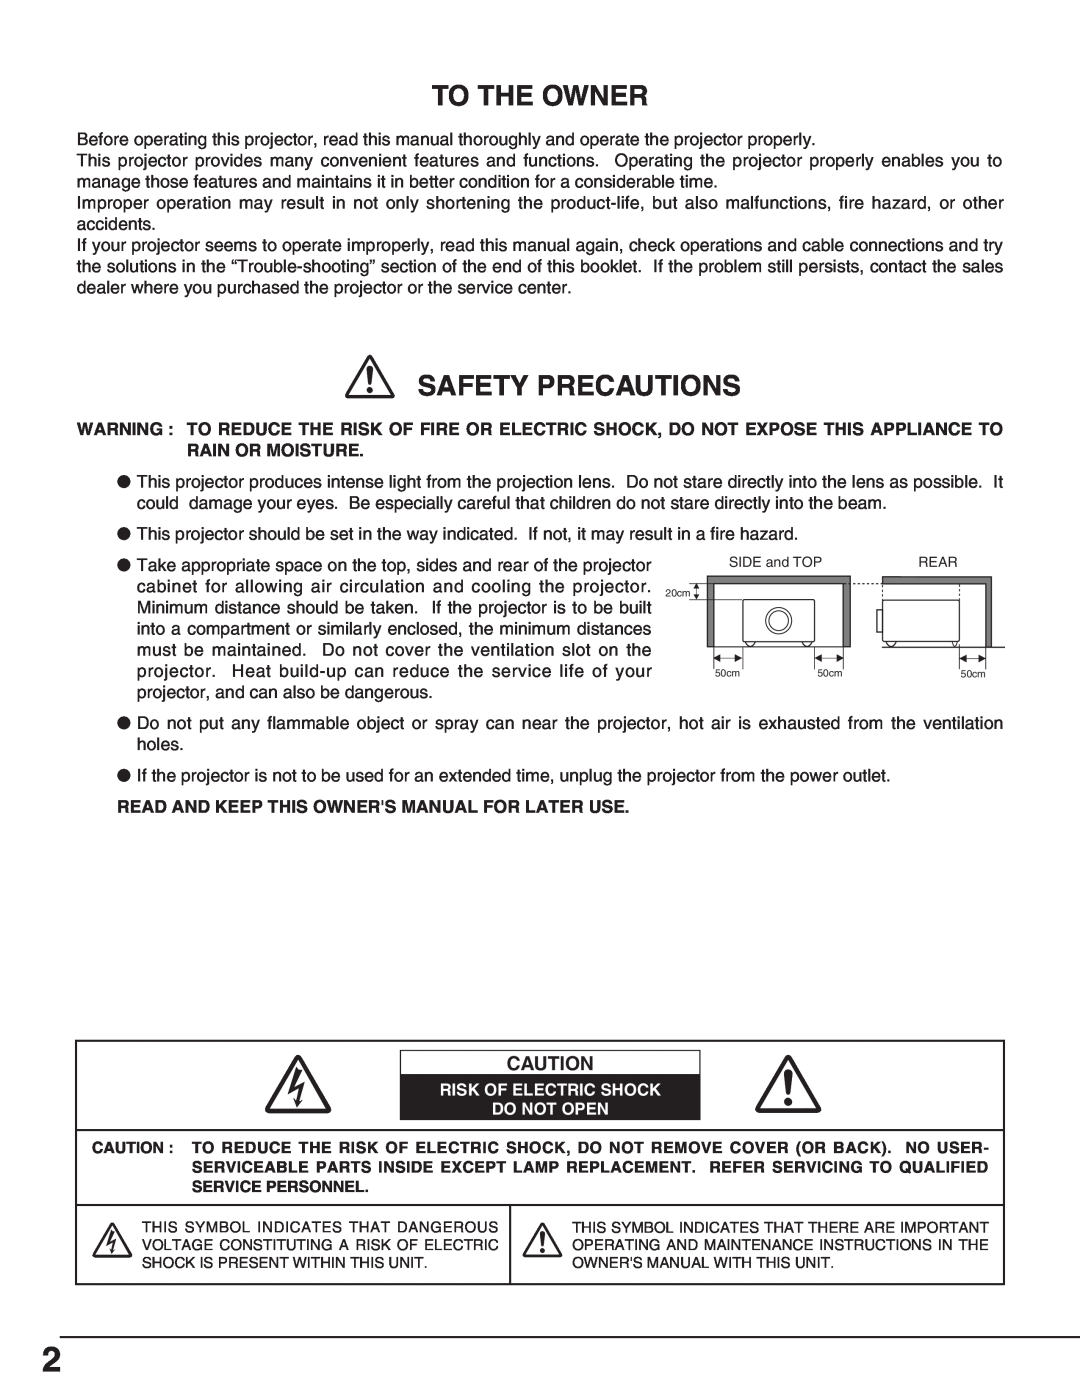 BOXLIGHT cp-16t manual To The Owner, Safety Precautions, Read And Keep This Owners Manual For Later Use 